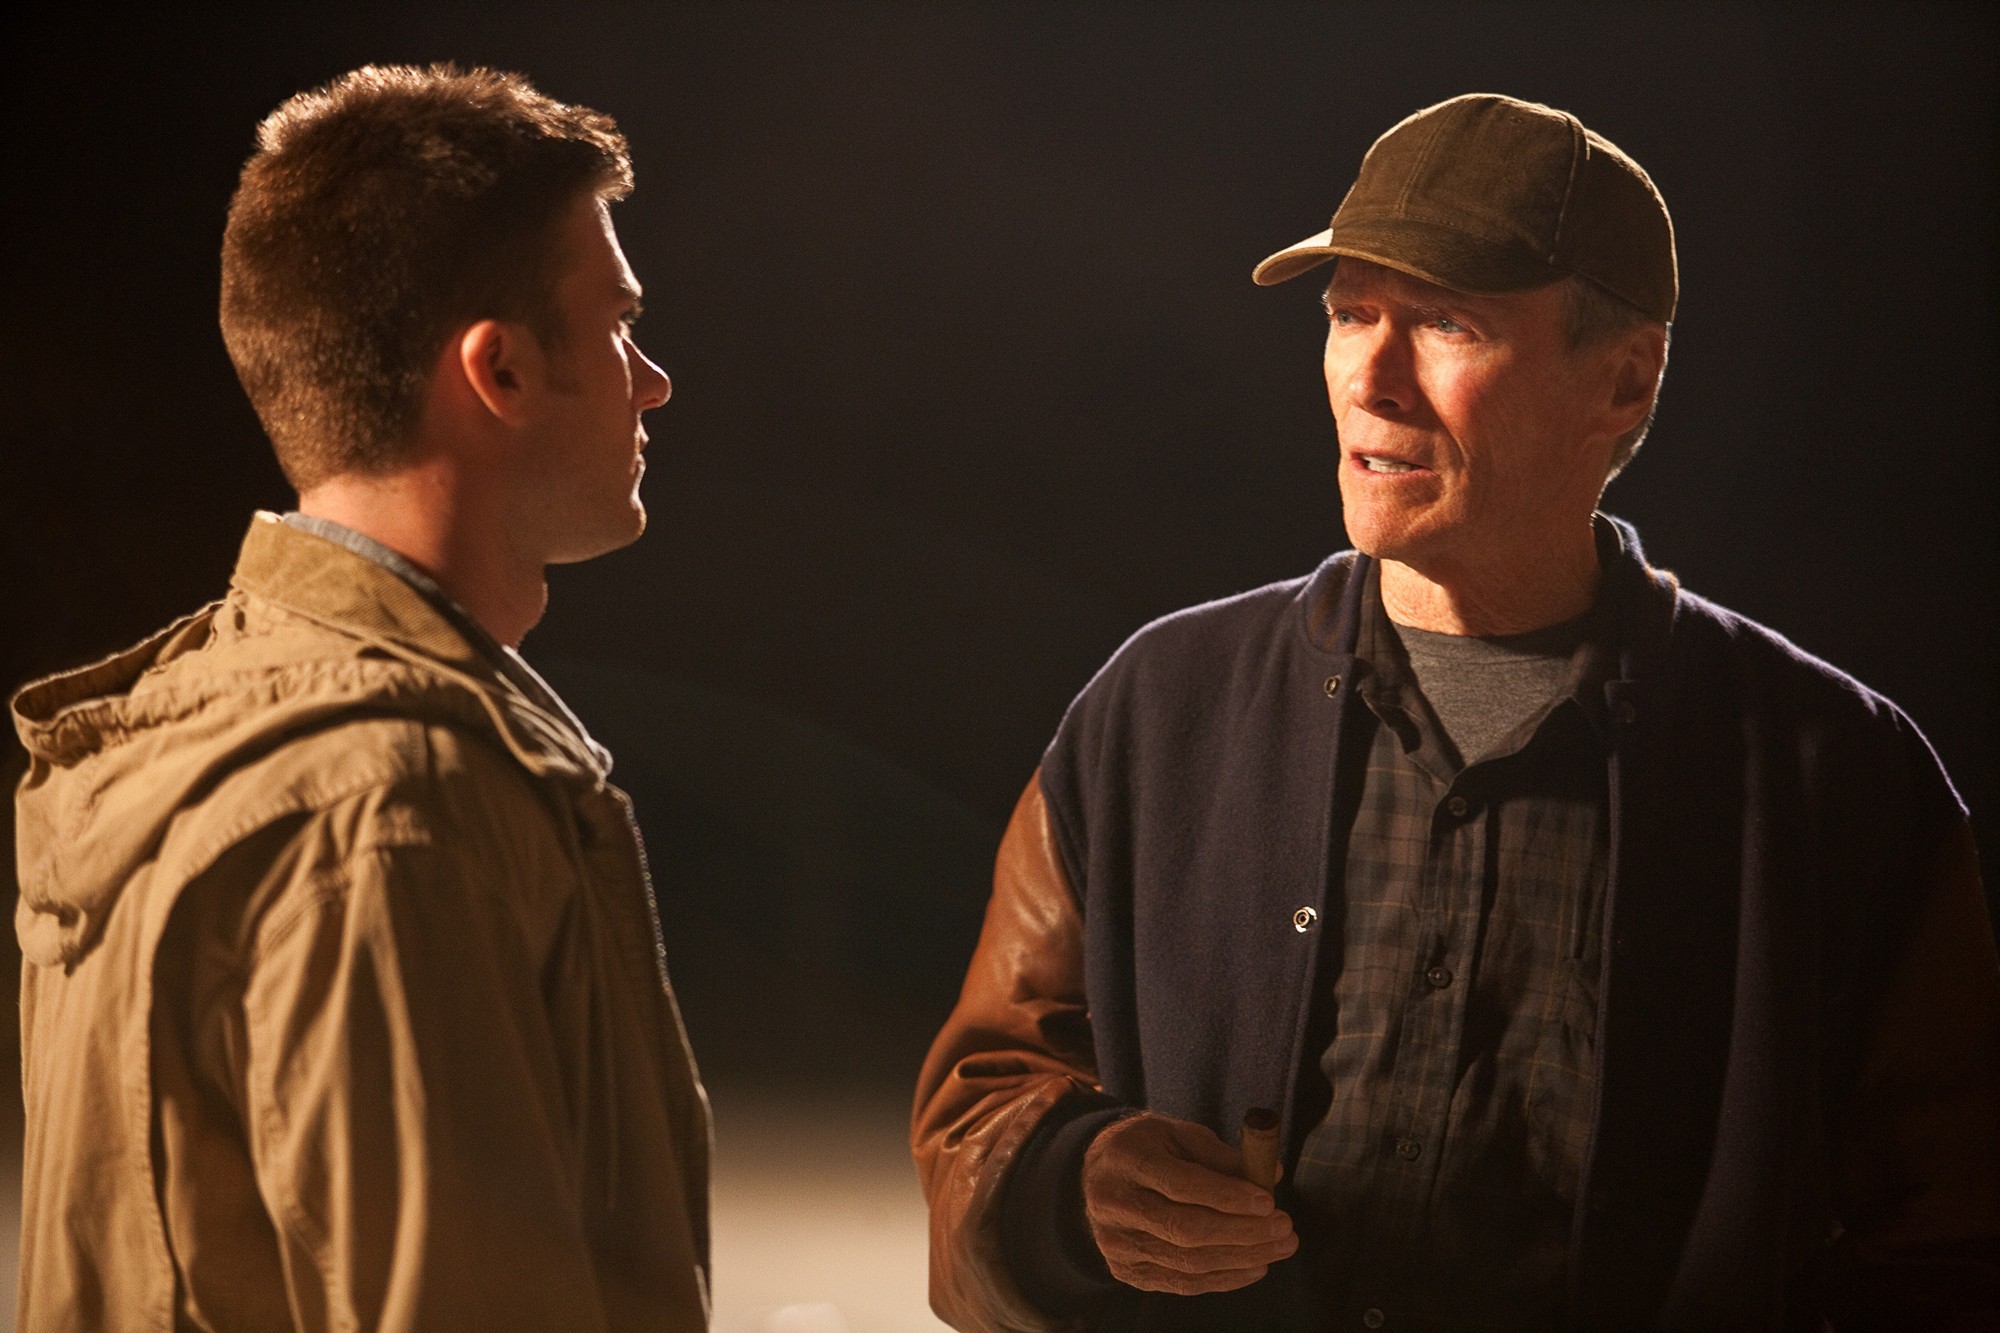 Scott Eastwood	stars as Billy Clark and Clint Eastwood stars as Gus in Warner Bros. Pictures' Trouble with the Curve (2012)